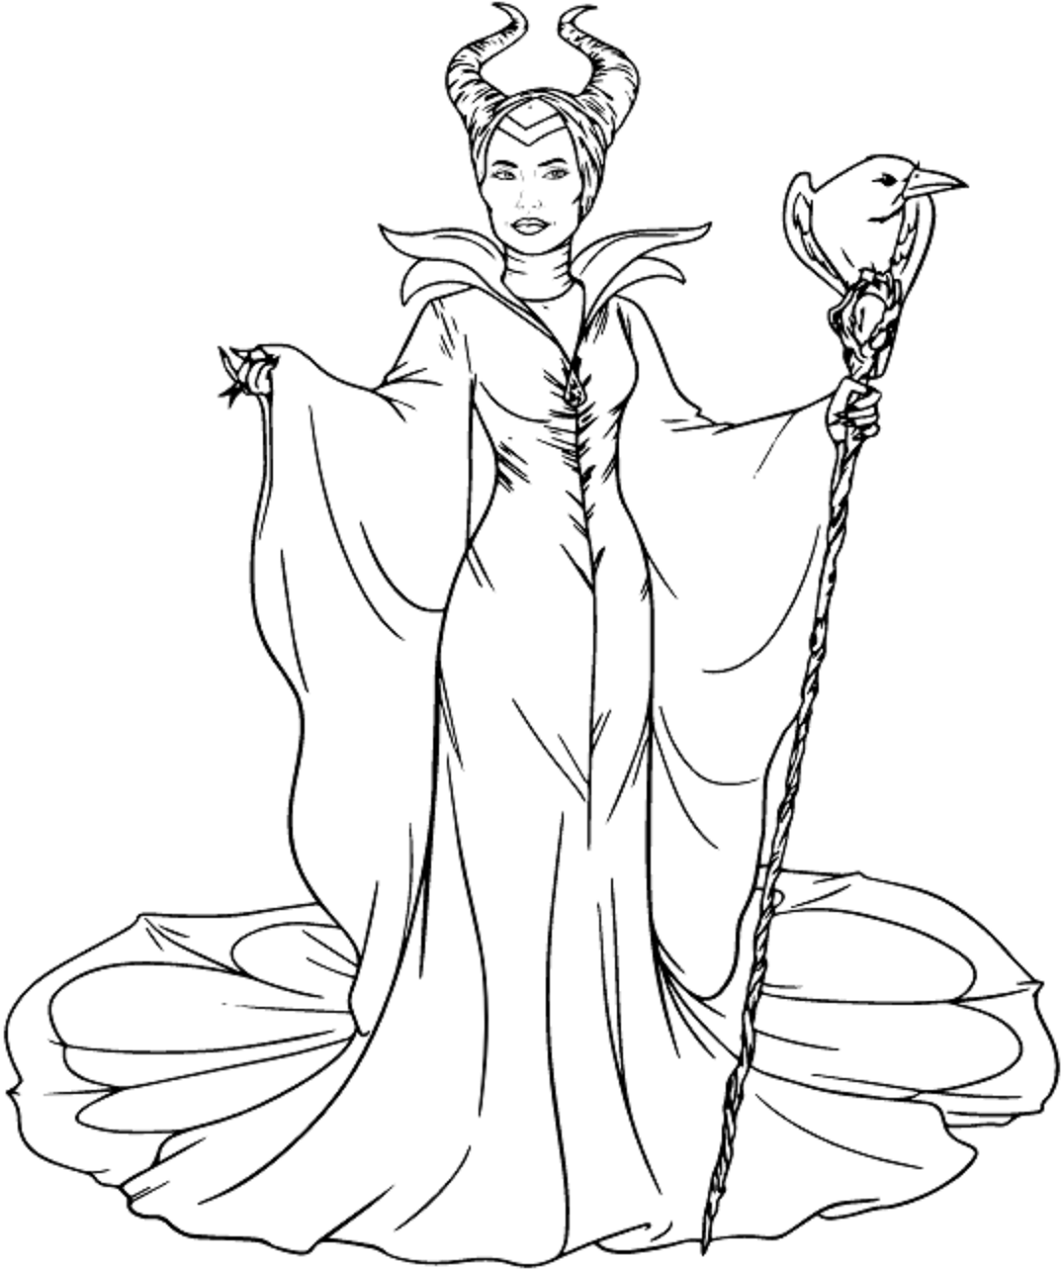 Maleficent In Sleeping Beauty Coloring Page   Free Printable ...